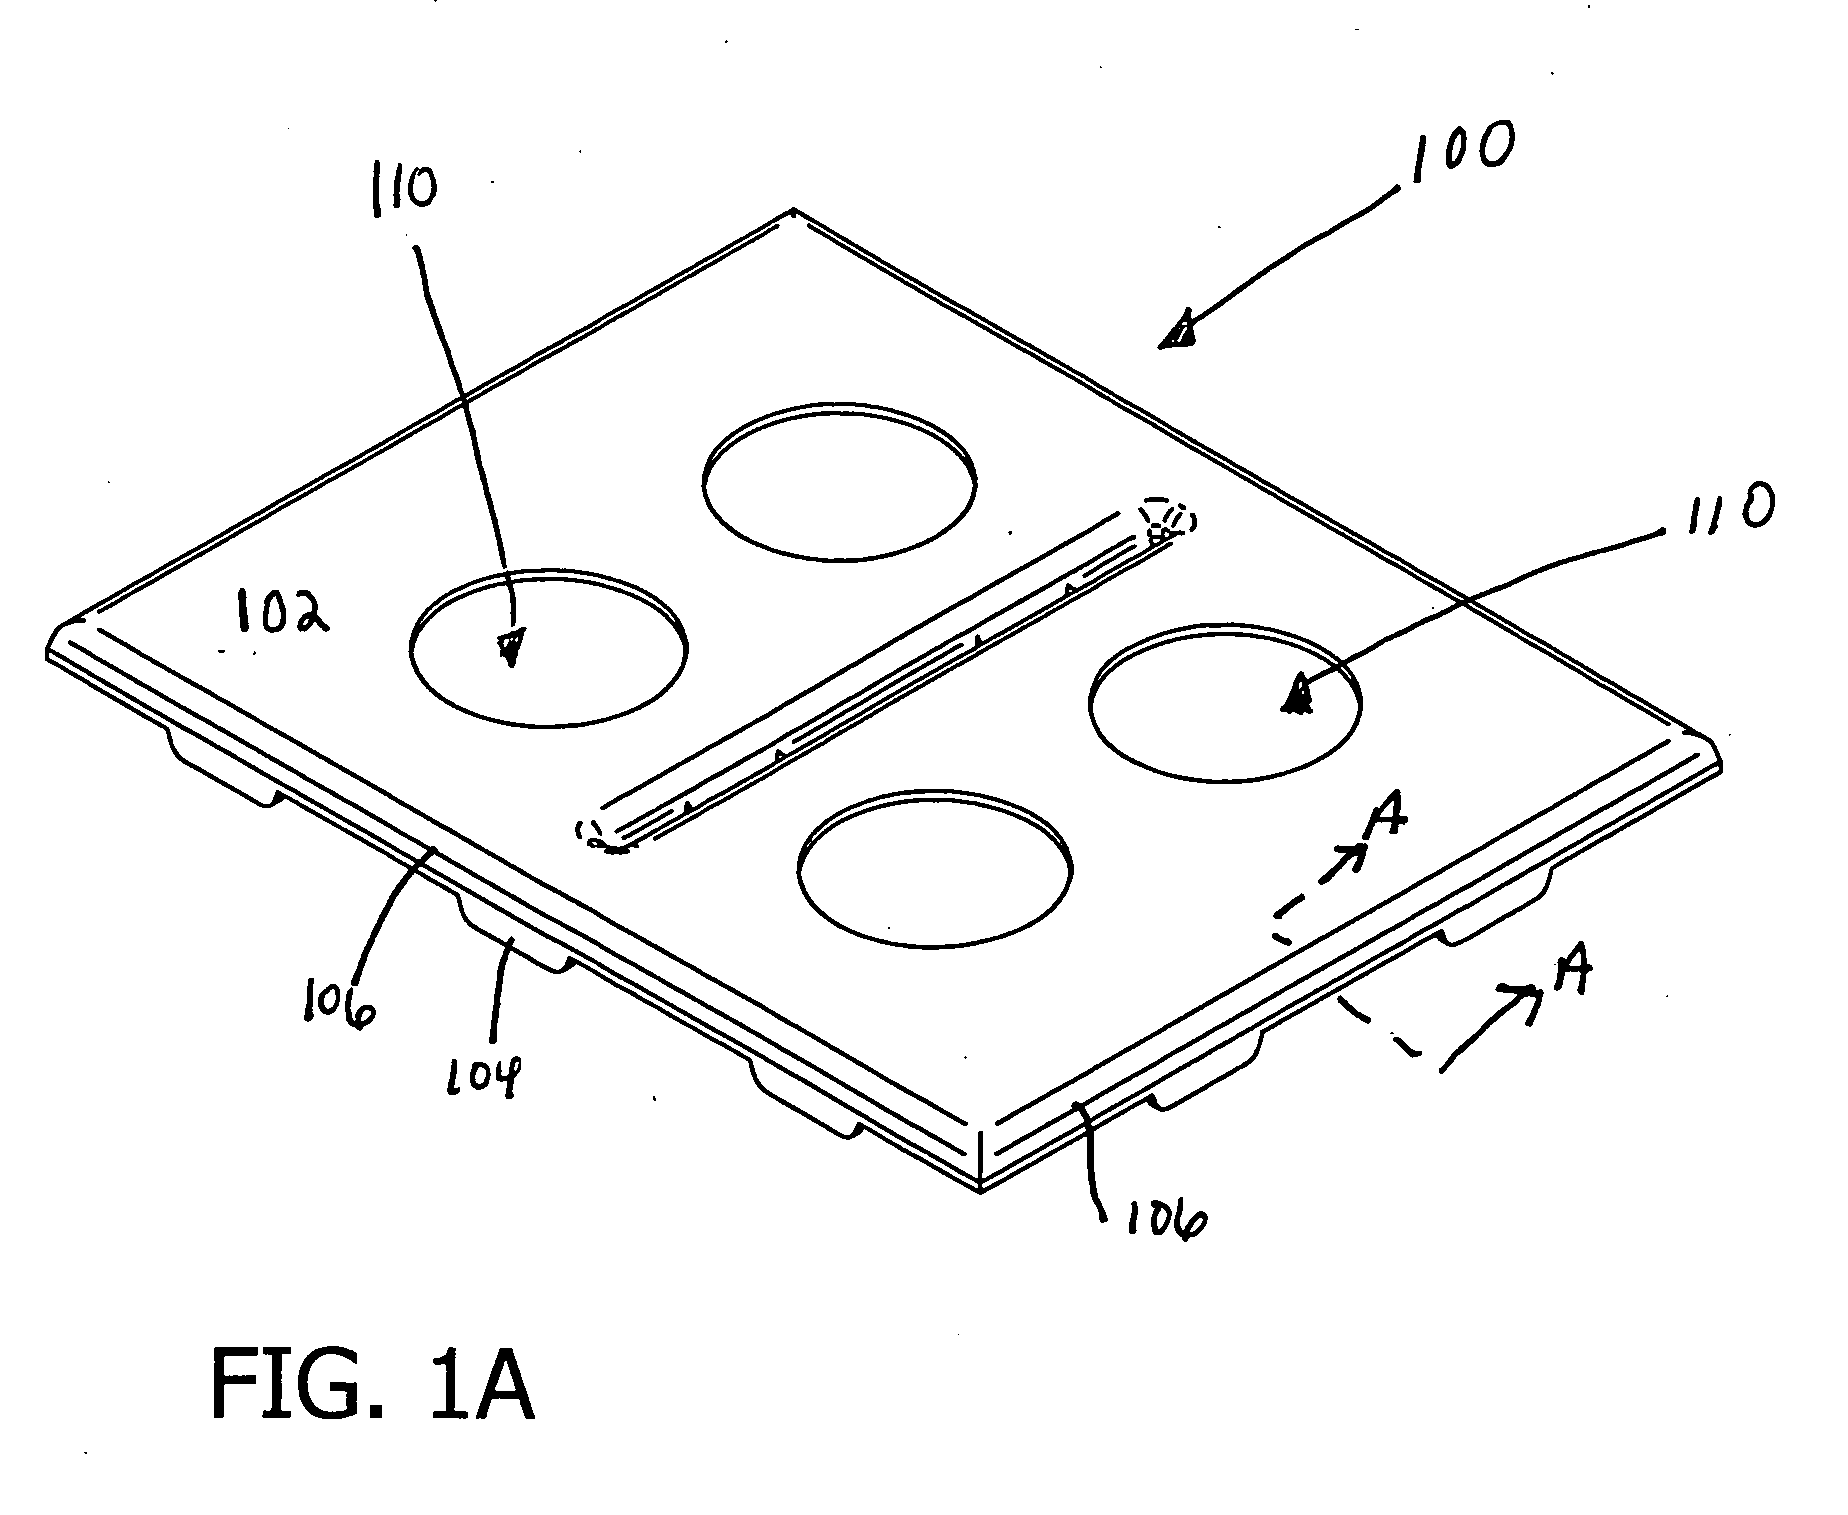 Electronic shielding apparatus and methods